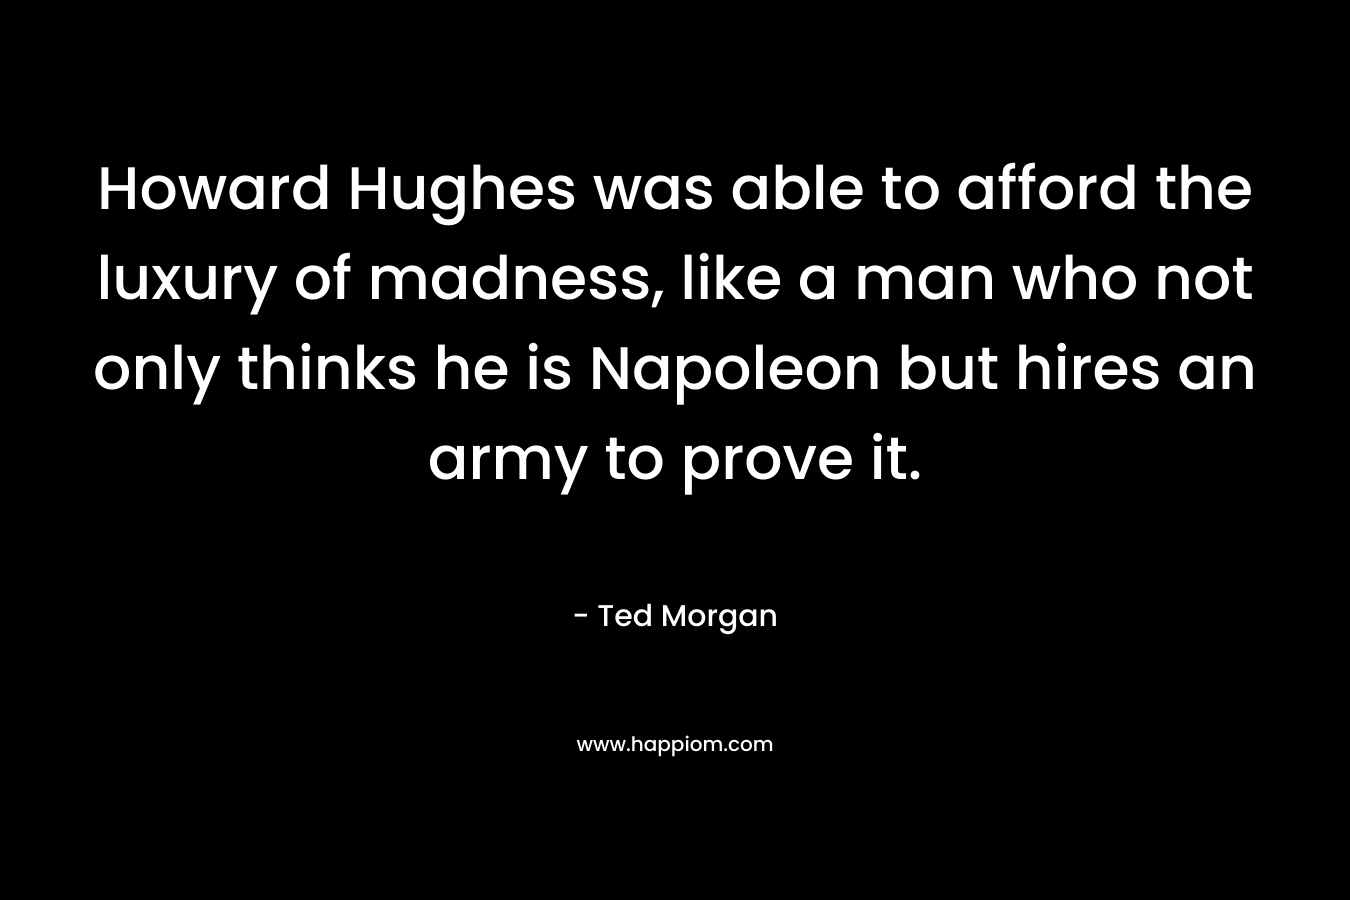 Howard Hughes was able to afford the luxury of madness, like a man who not only thinks he is Napoleon but hires an army to prove it. – Ted Morgan